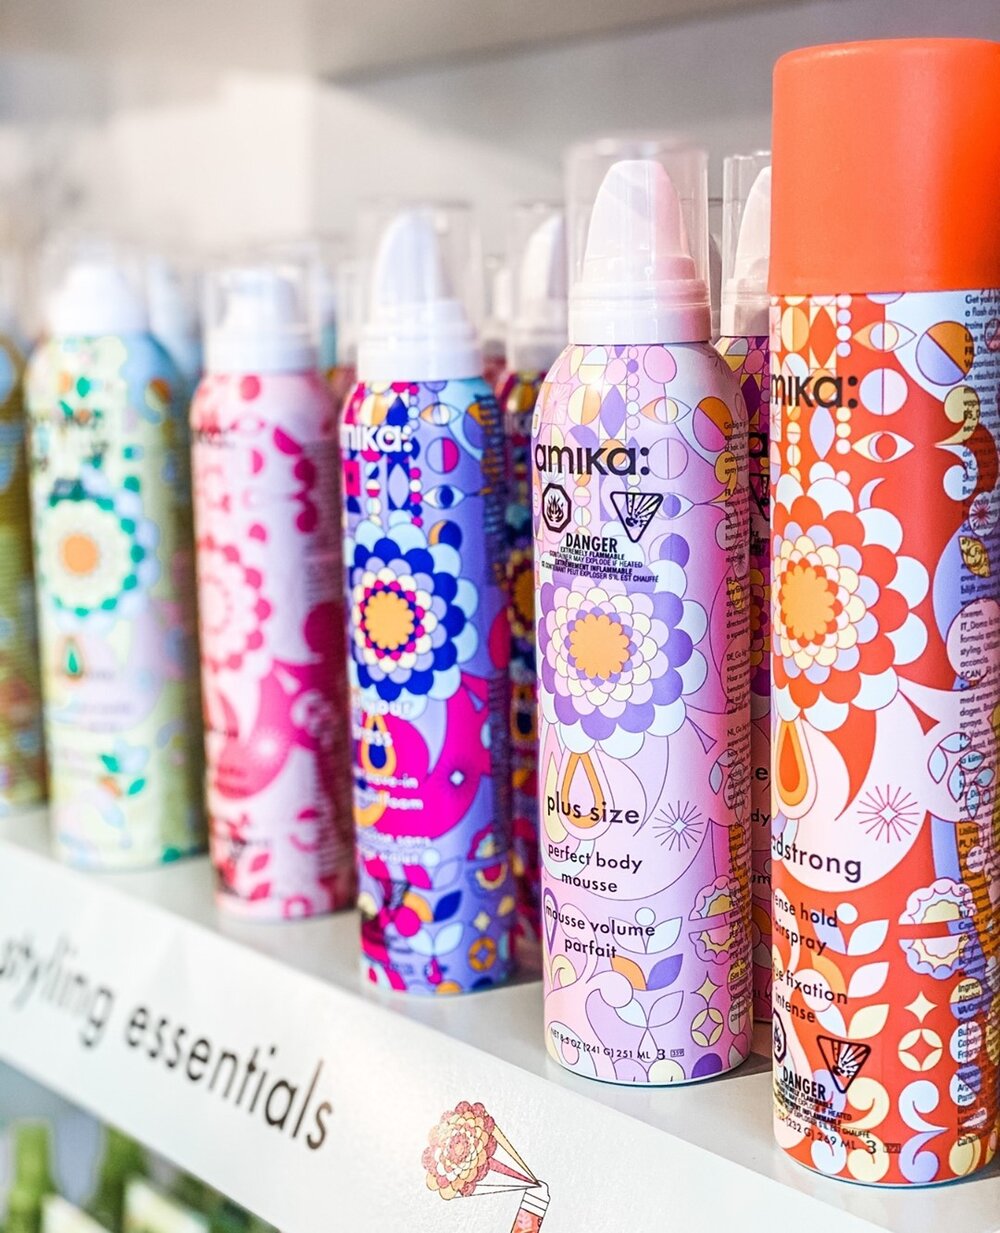 Hello, Pretty!⁠
⁠
Looking to give your hair a little more volume, texture, hydration or hold?⁠
⁠
@amika has you covered! Not only is their packaging CUTE, their products are well-priced, smell great and work SO well! ⁠
⁠
Pop into the salon and check 